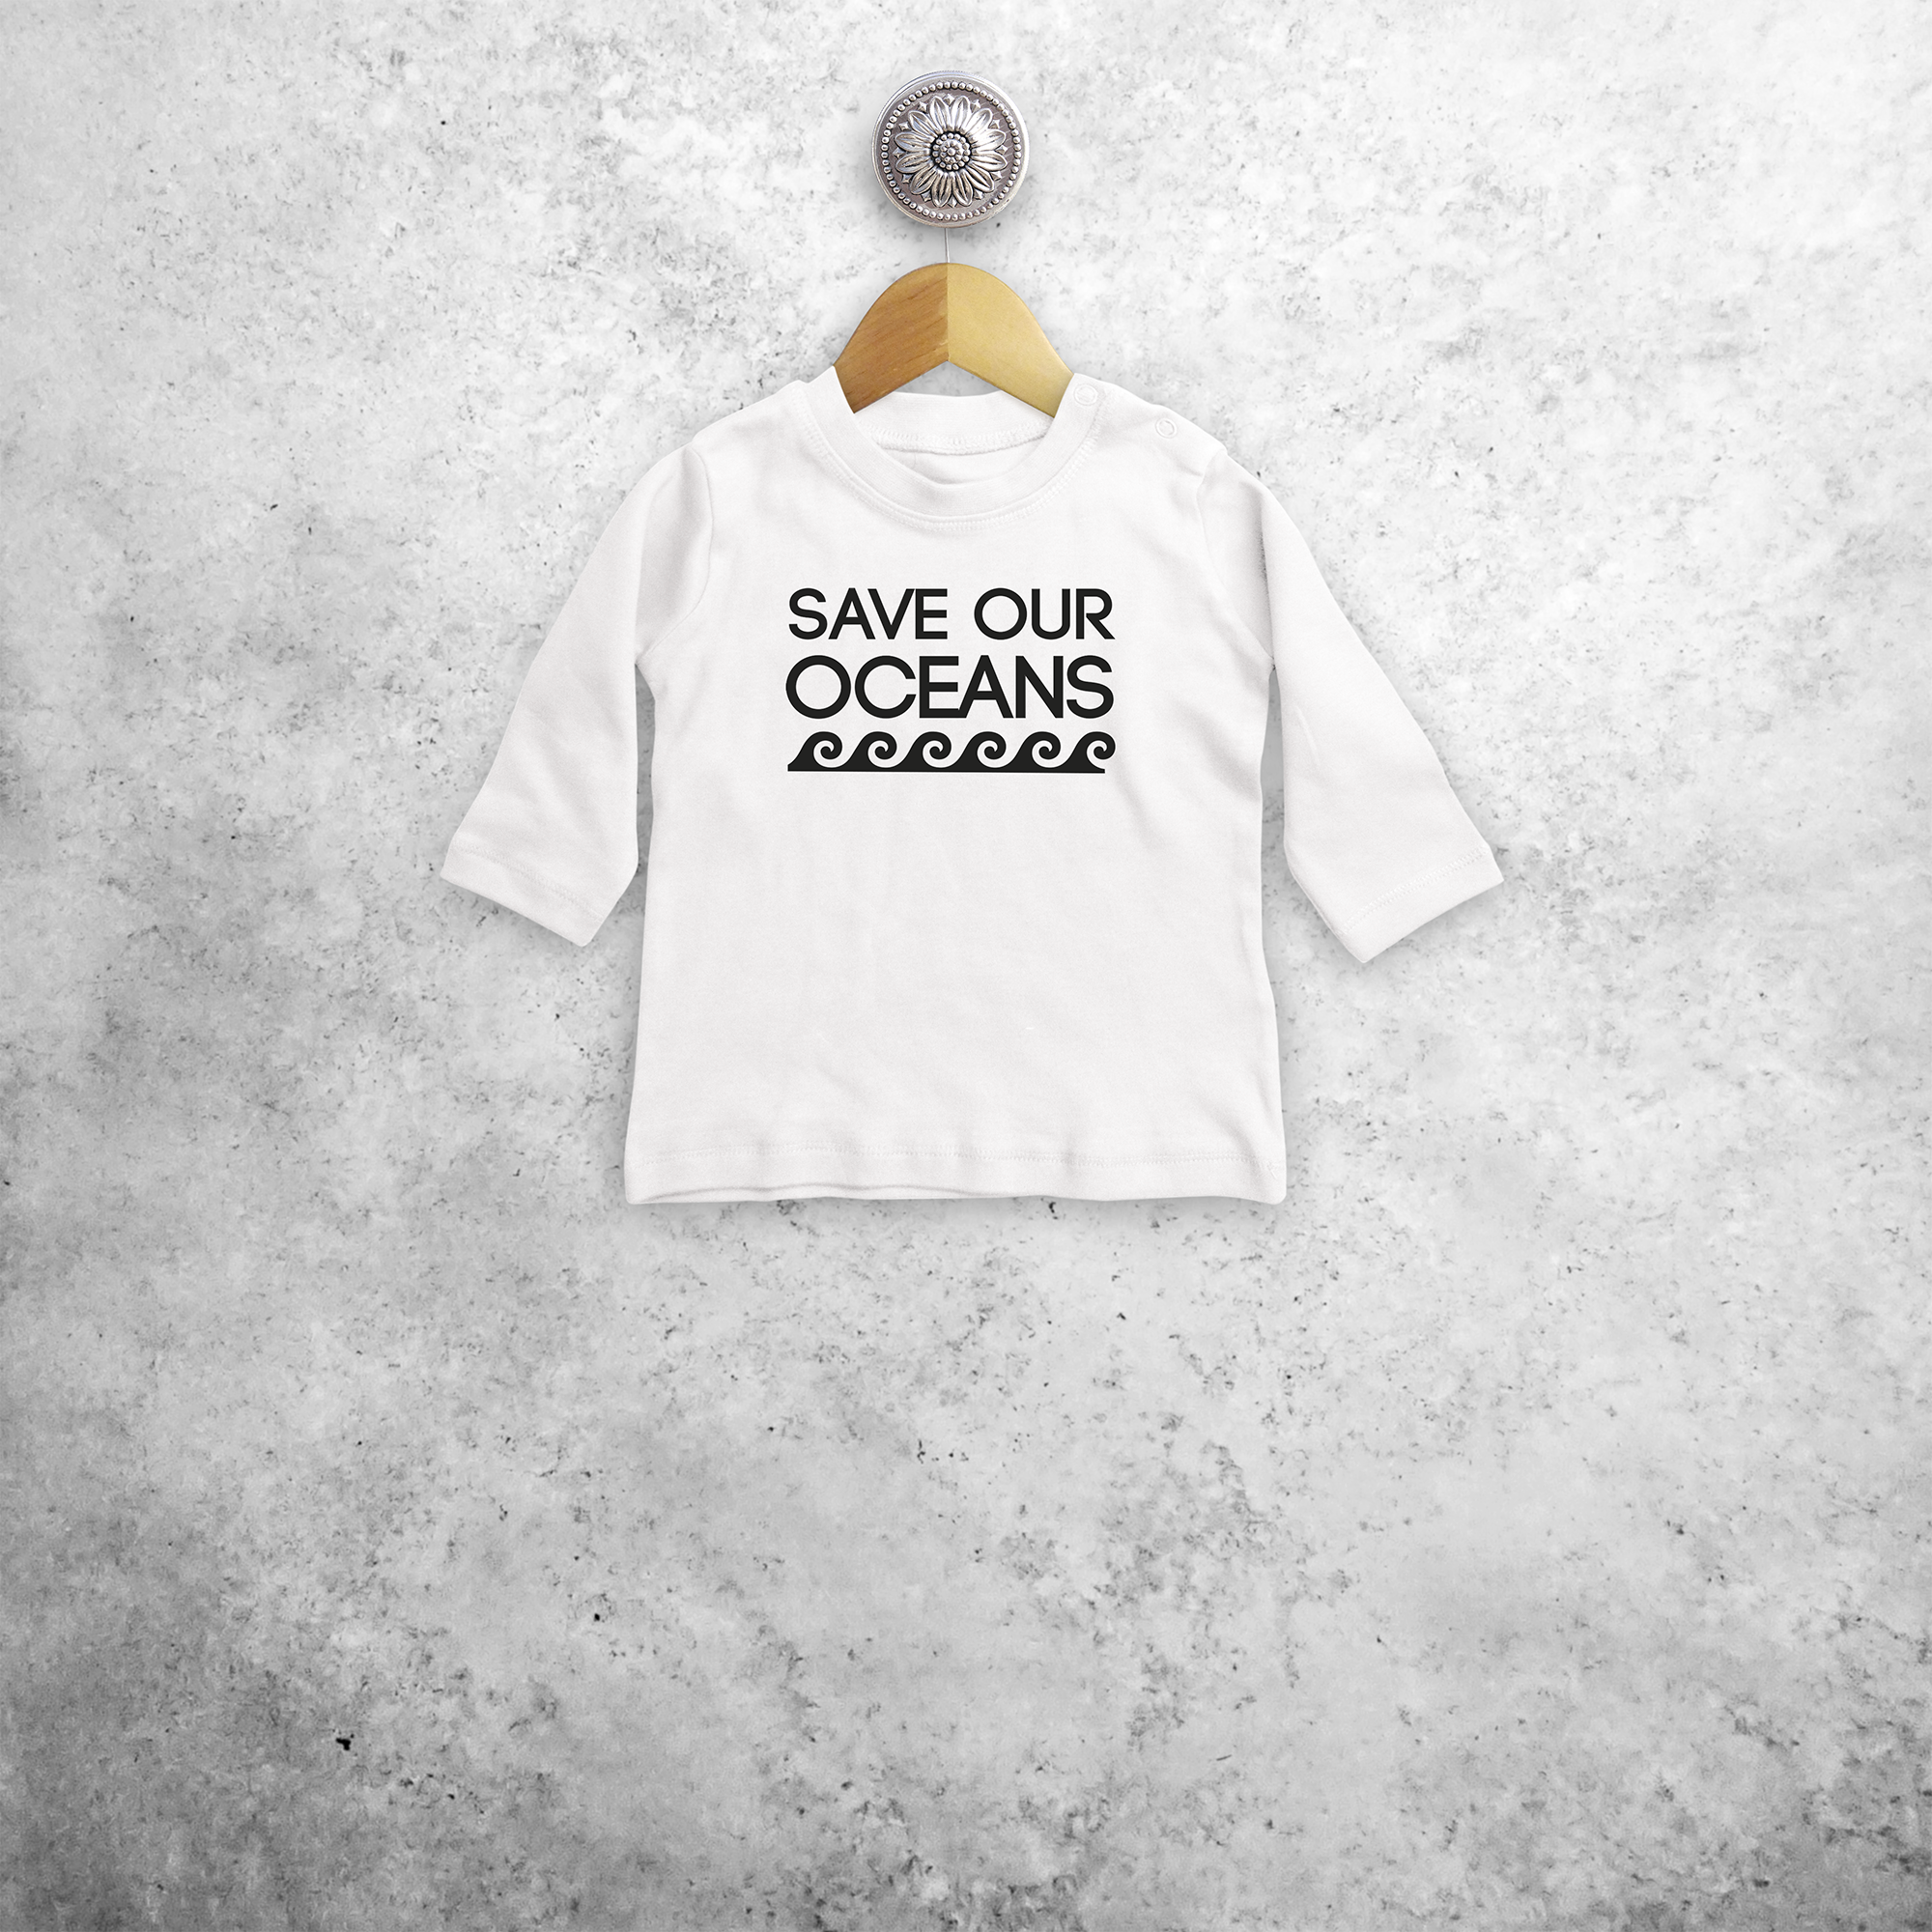 'Save our oceans' baby longsleeve shirt